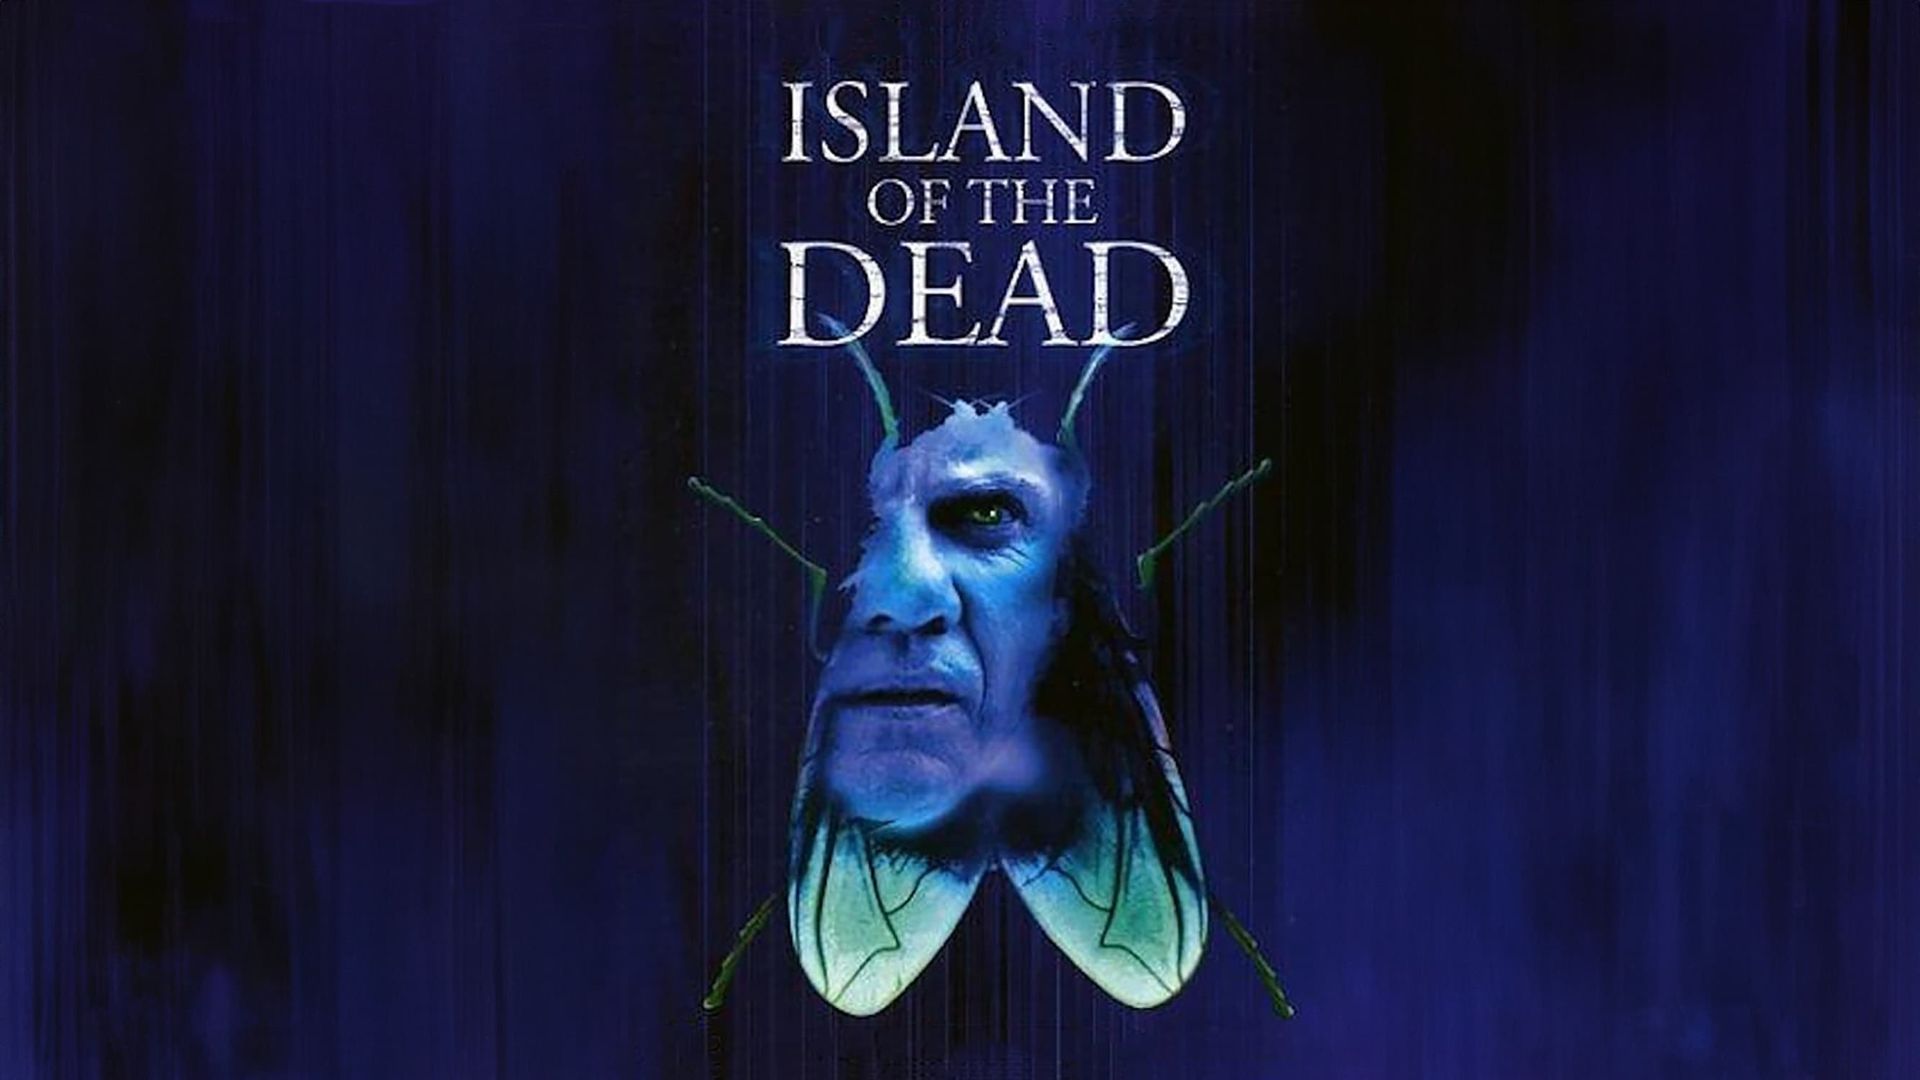 Island of the Dead background